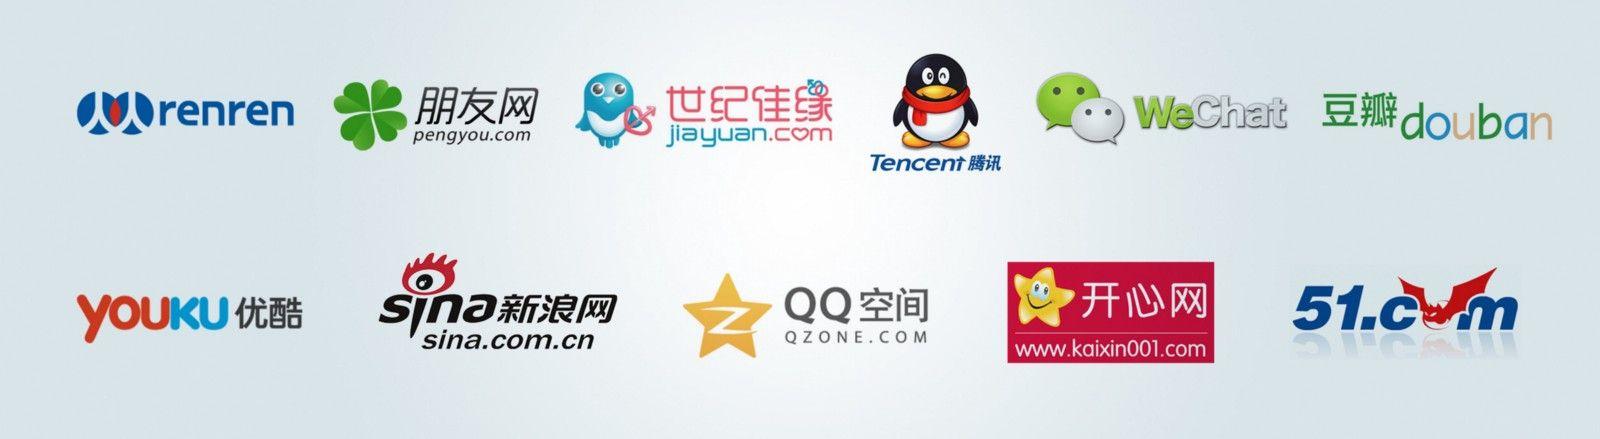 Tencent QQ Logo - Introduction to China's social media landscape